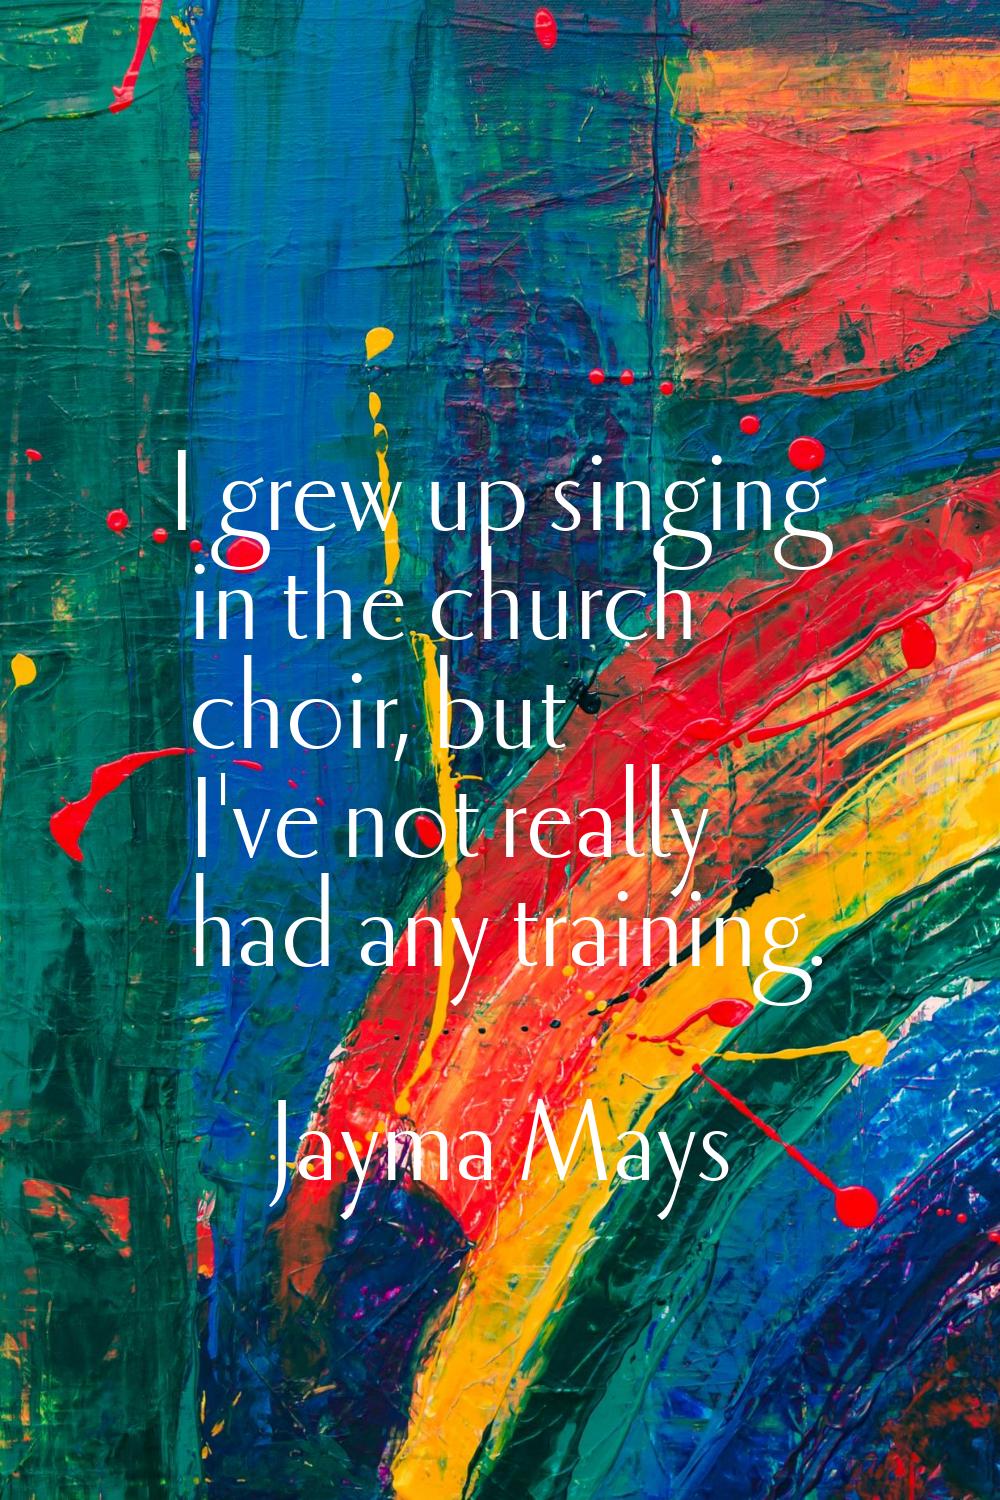 I grew up singing in the church choir, but I've not really had any training.